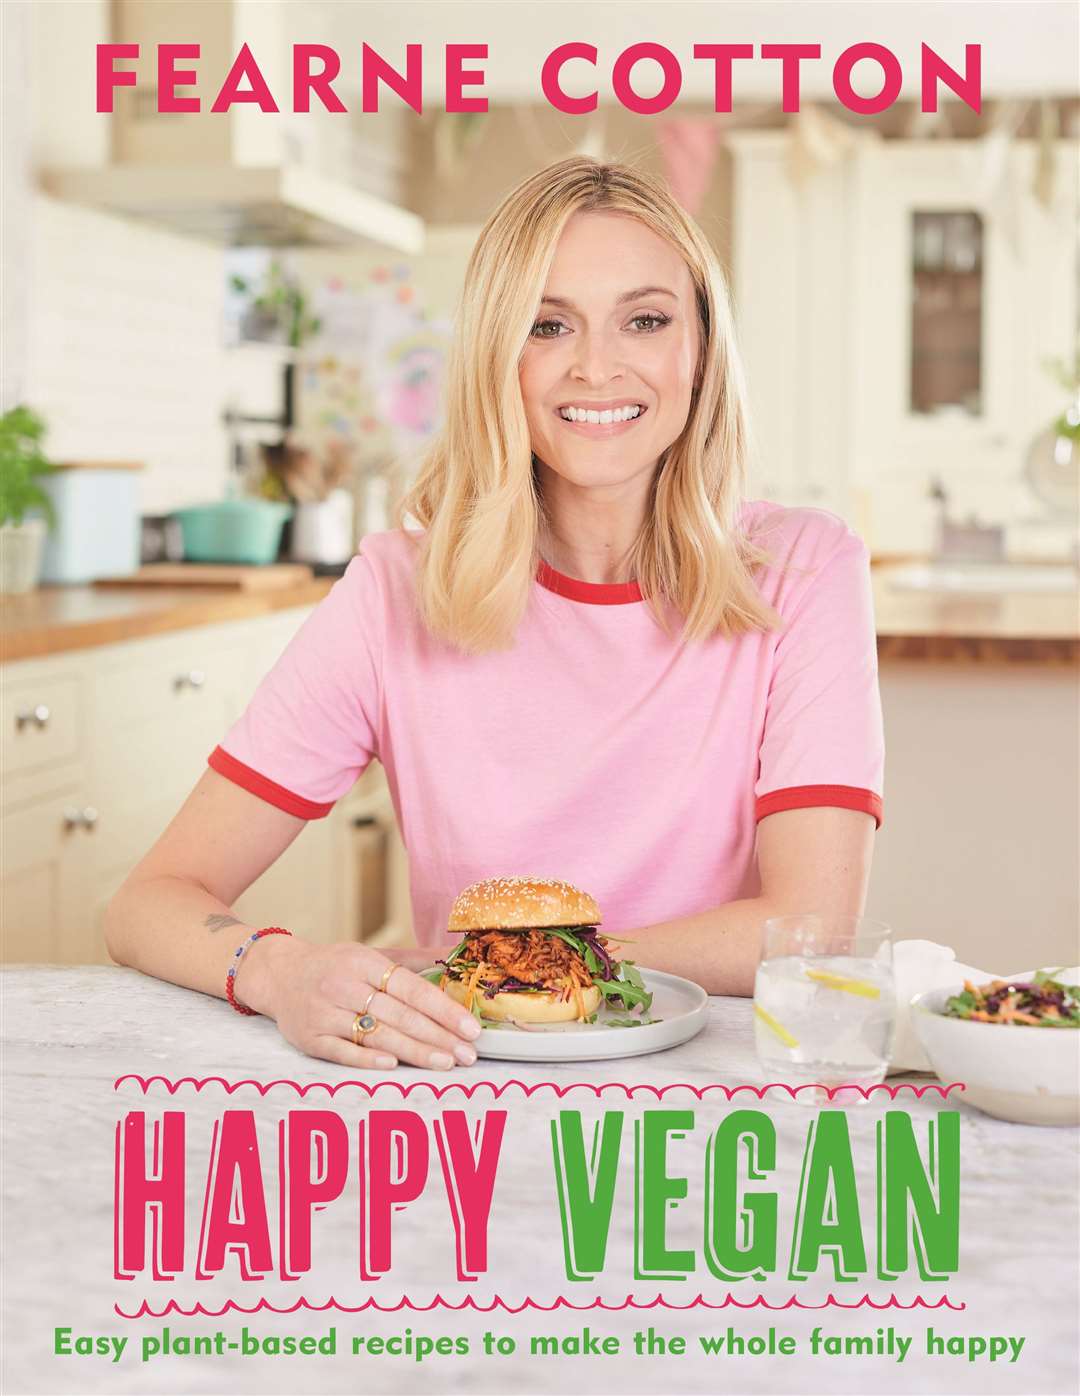 Happy Vegan: Easy Plant Based Recipes To Make The Whole Family Happy by Fearne Cotton, is published by Orion Spring, priced £20. Available now.